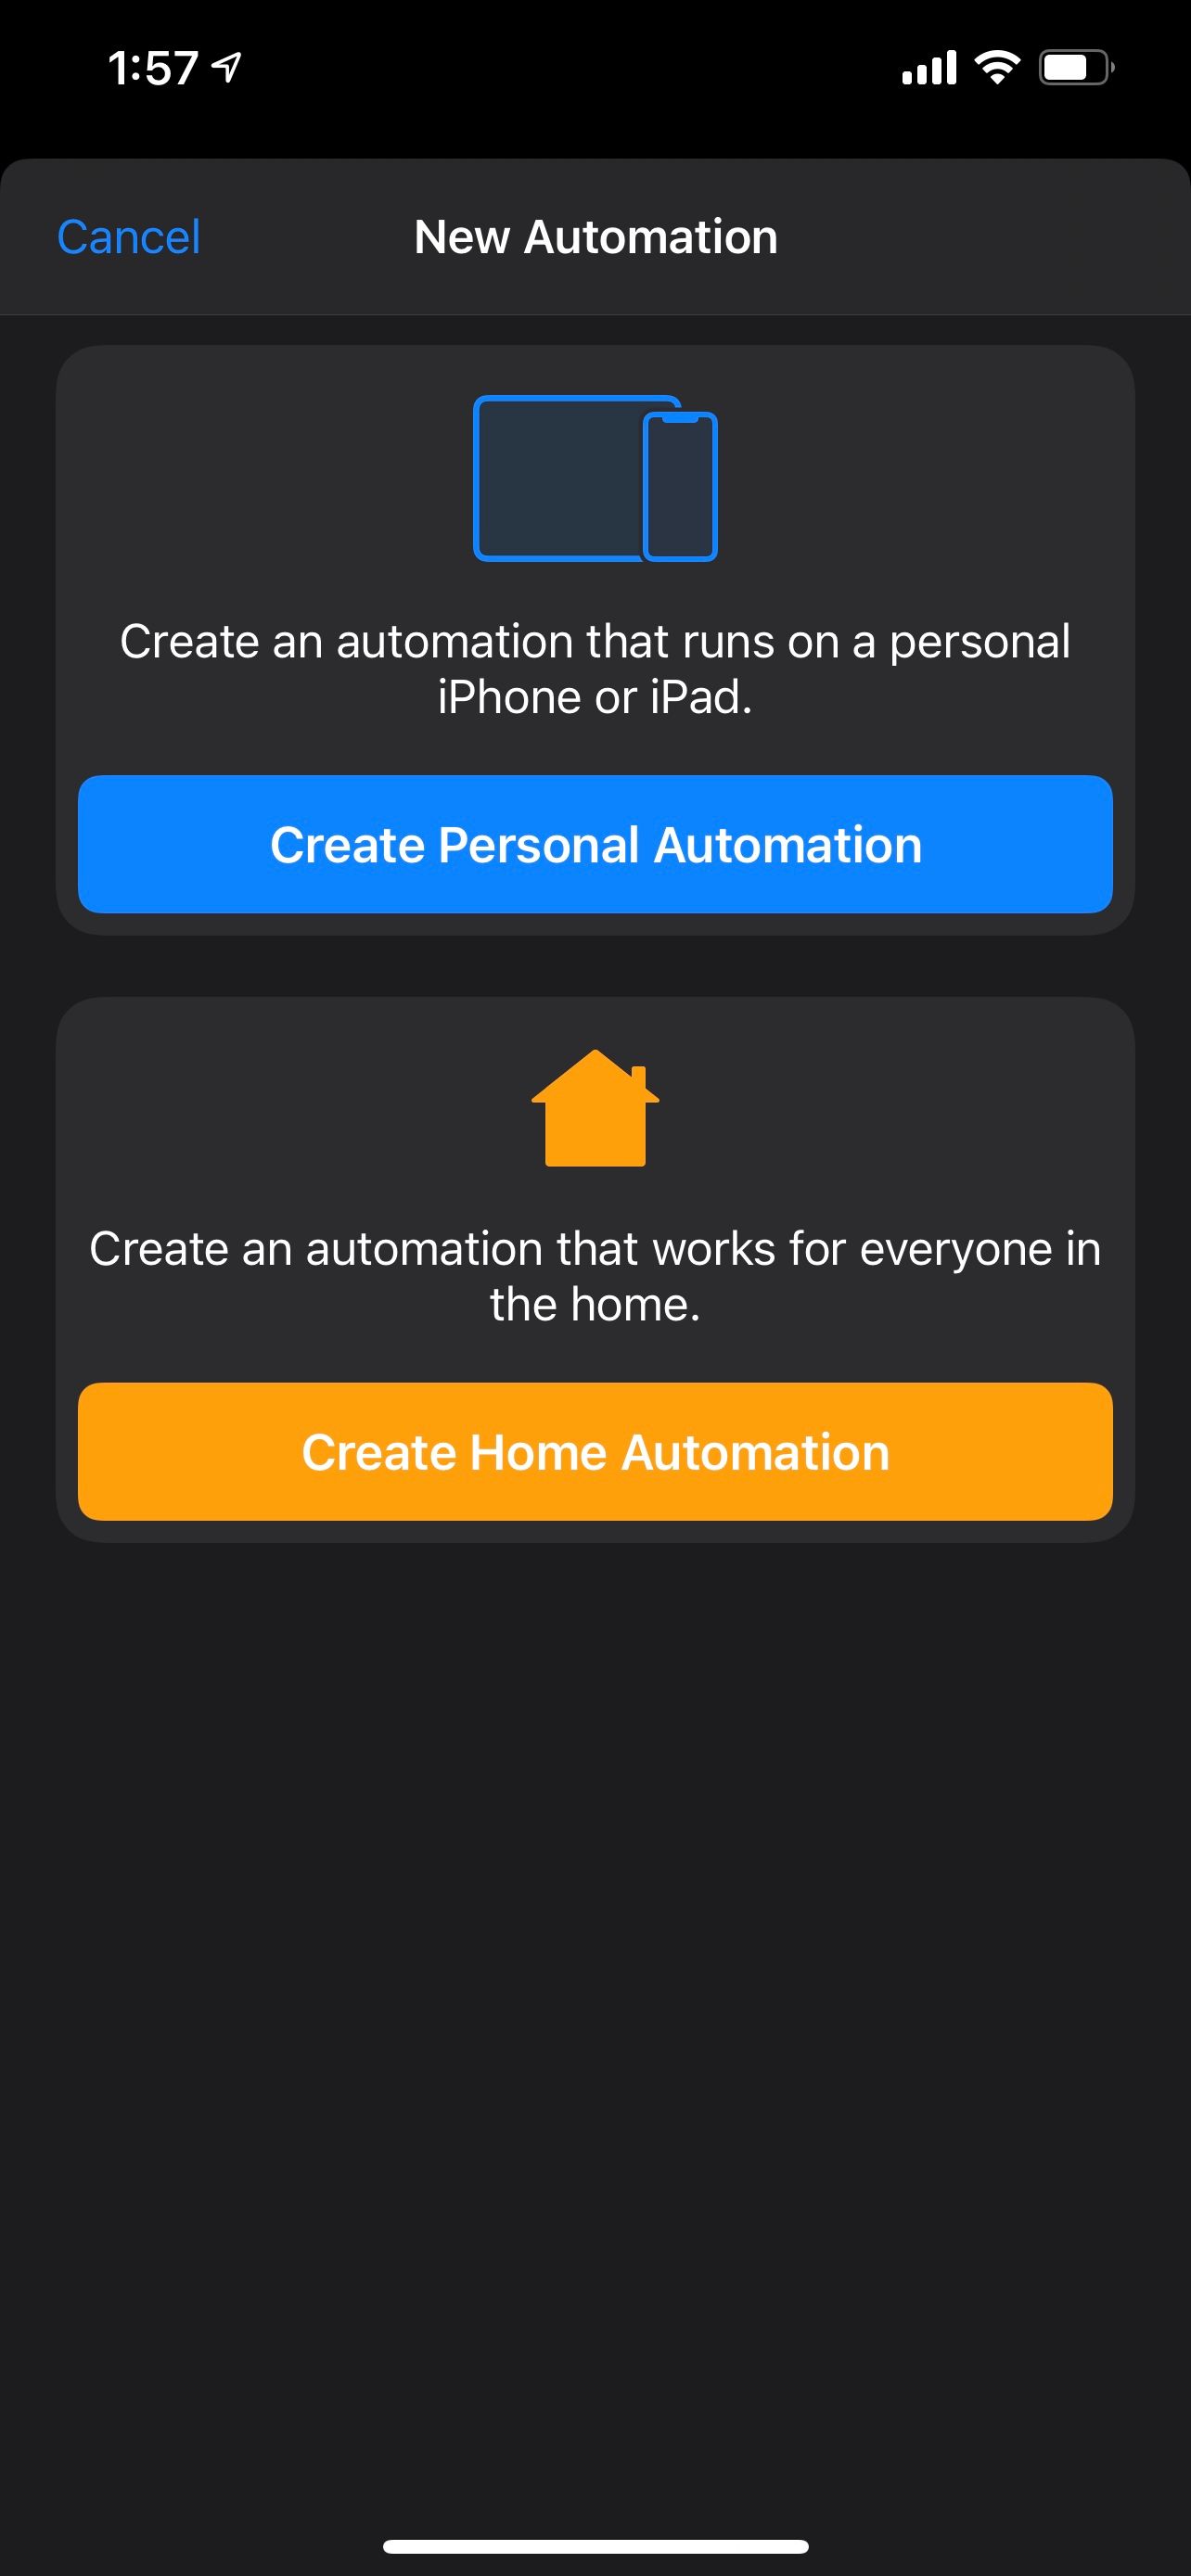 Personal or home automation choice